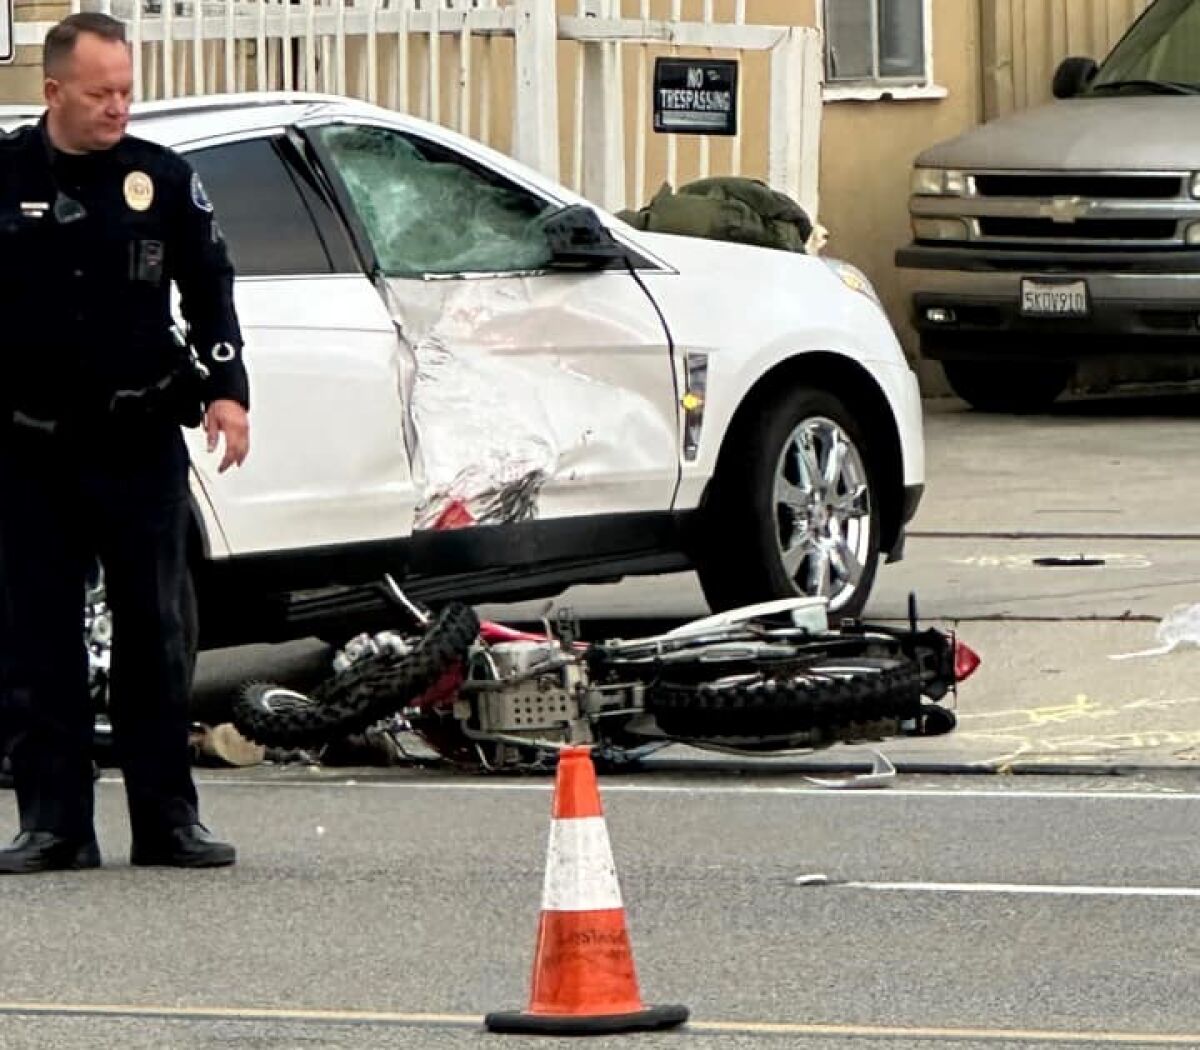 A Costa Mesa police officer inspects the scene of a crash on Placentia Avenue.